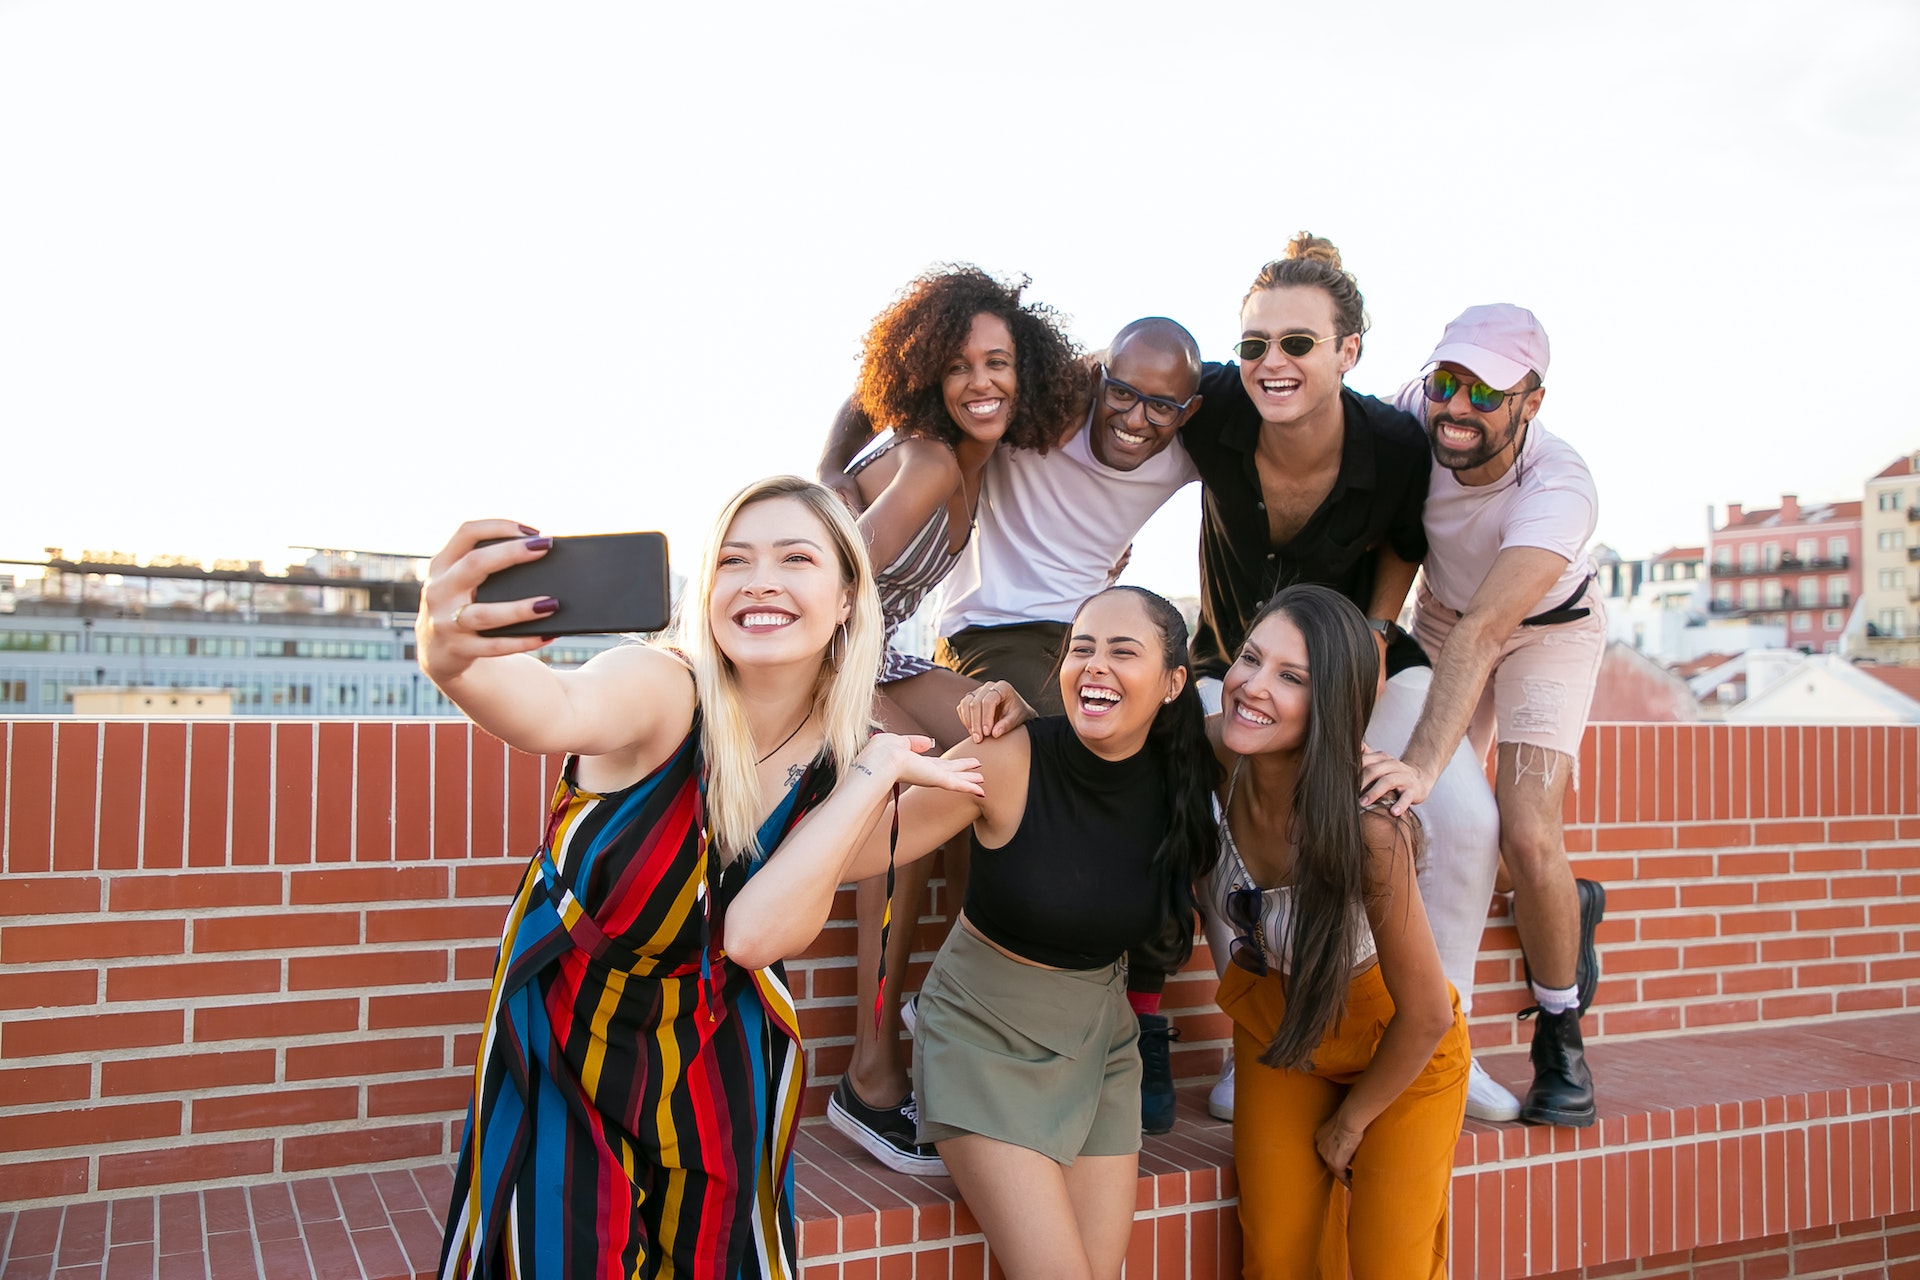 A group of people taking a photo | Source: Pexels